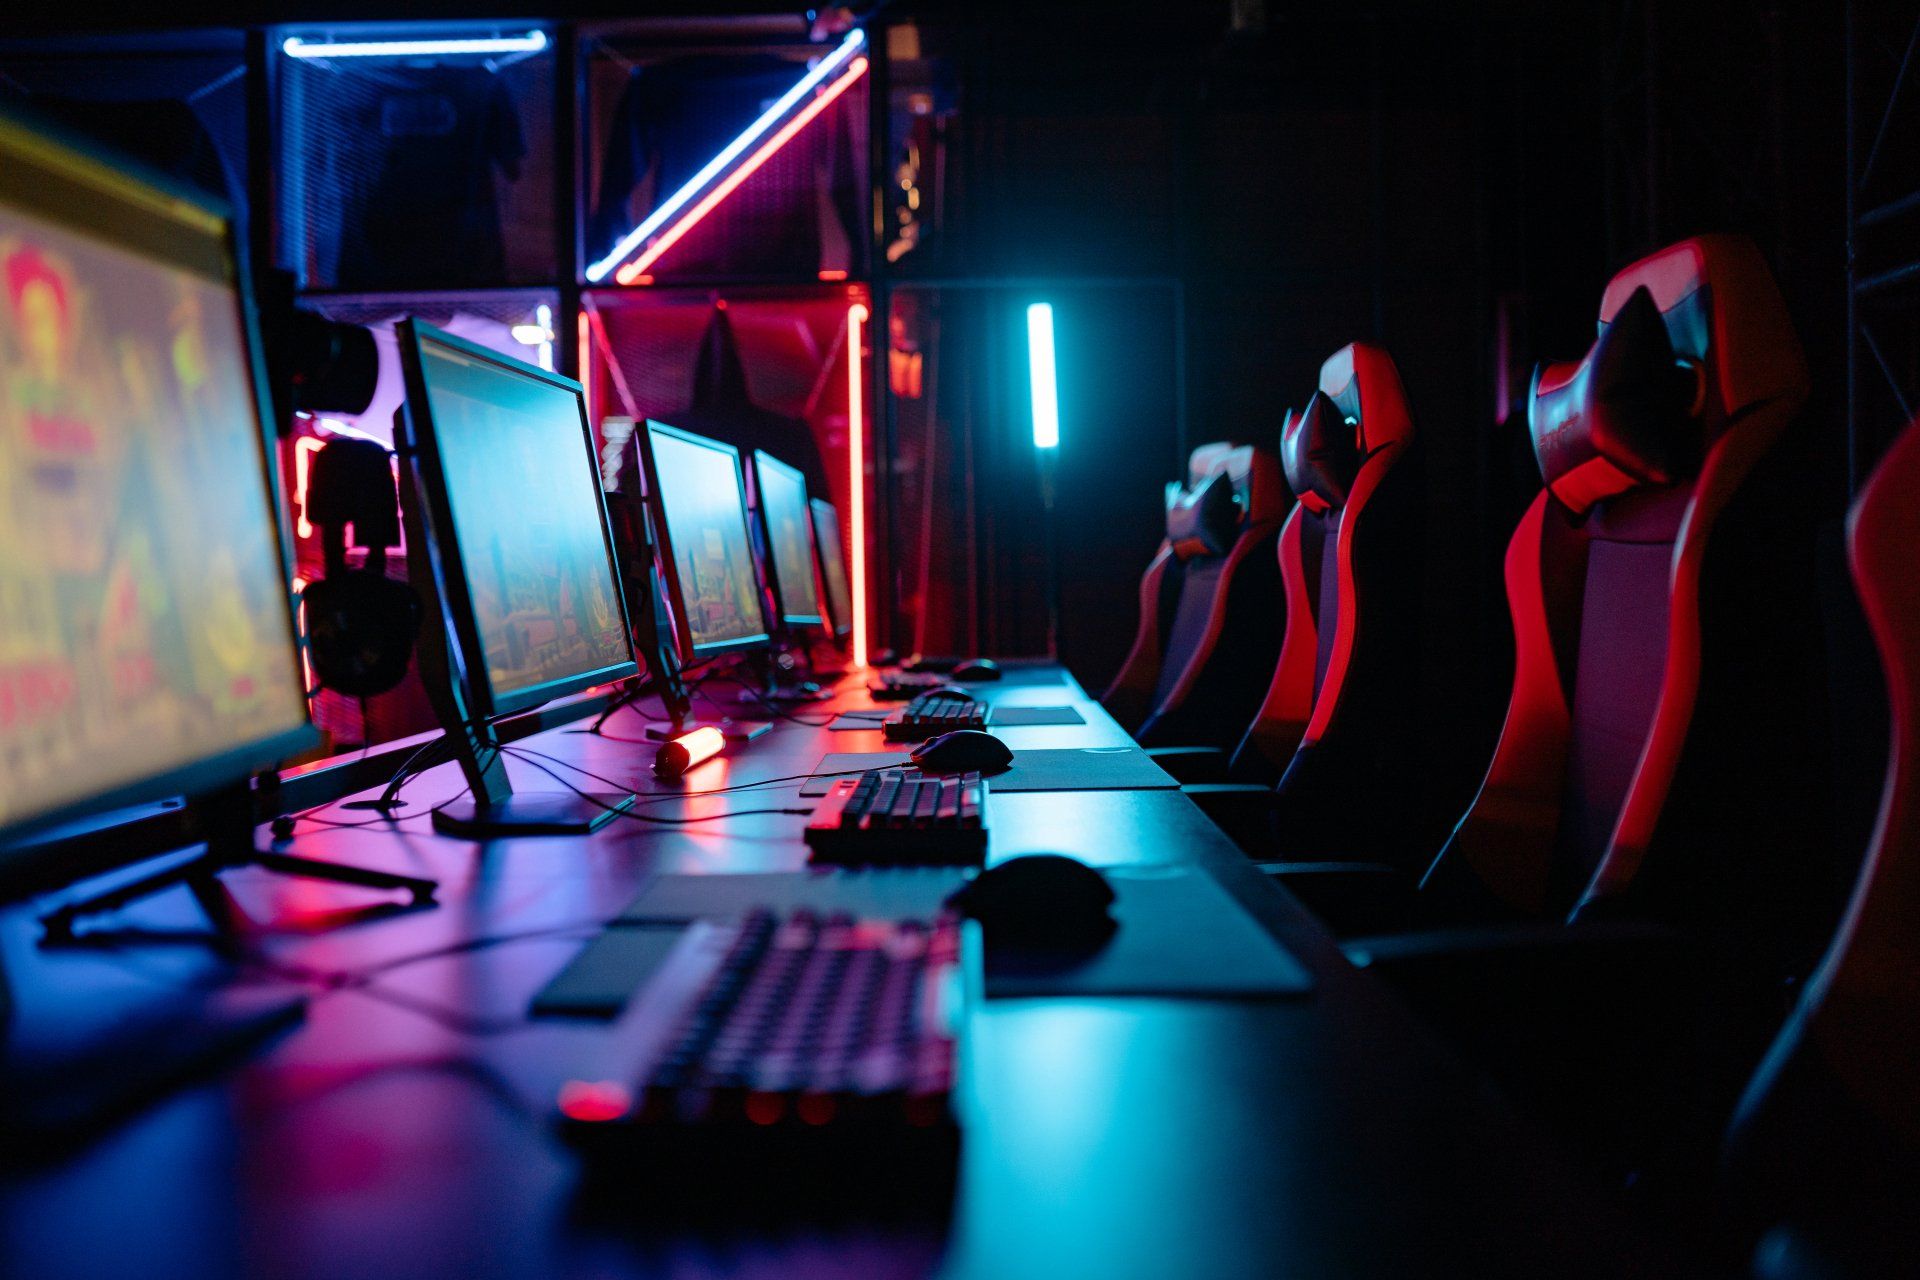 A row of racing-style gaming chairs at a long black desk in a dark room with red and purple led lights. On the desk is one PC set up for each gaming chair, with a keyboard and mouse